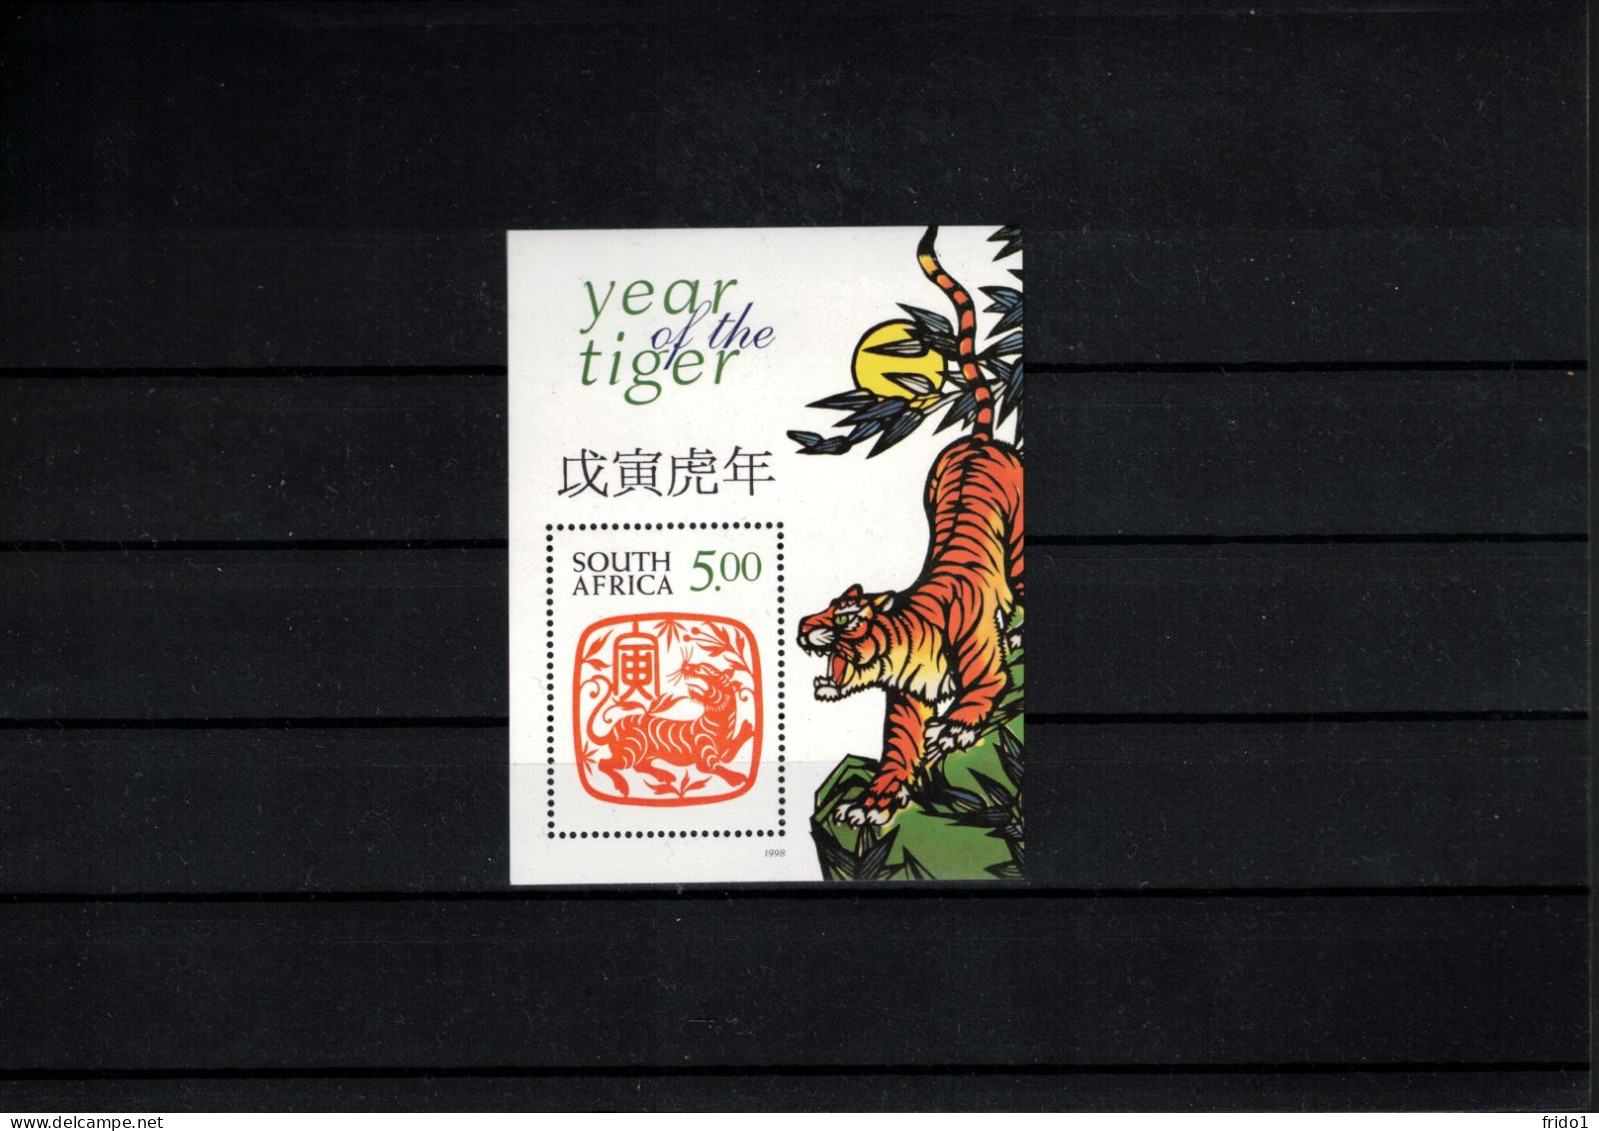 South Africa 1998 Year Of The Tiger Block Postfrisch / MNH - Nouvel An Chinois